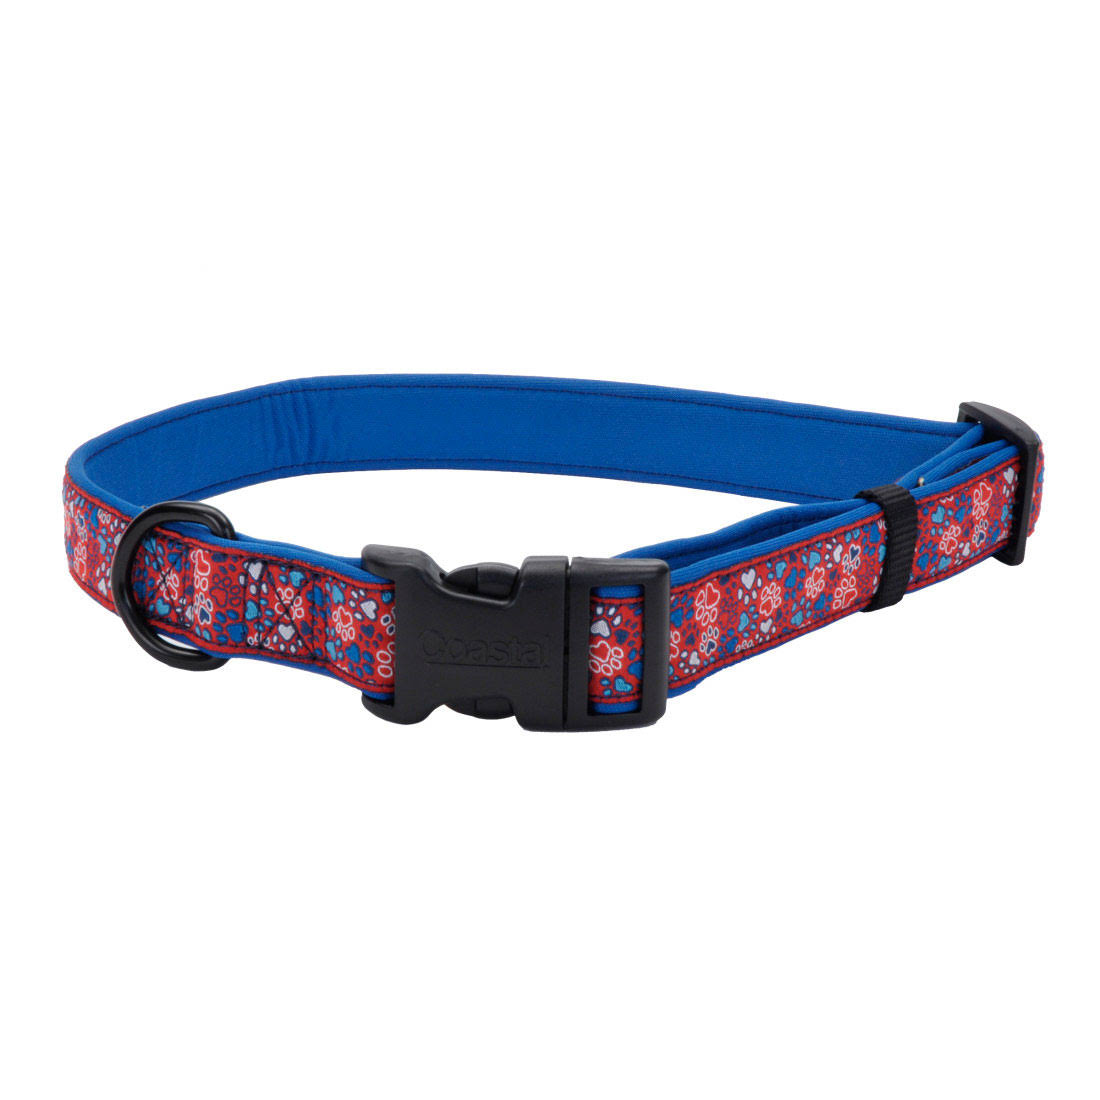 Coastal Pet Ribbon Weave Neoprene Collar - Red and Blue Paws, 5/8" x 8" to 12"